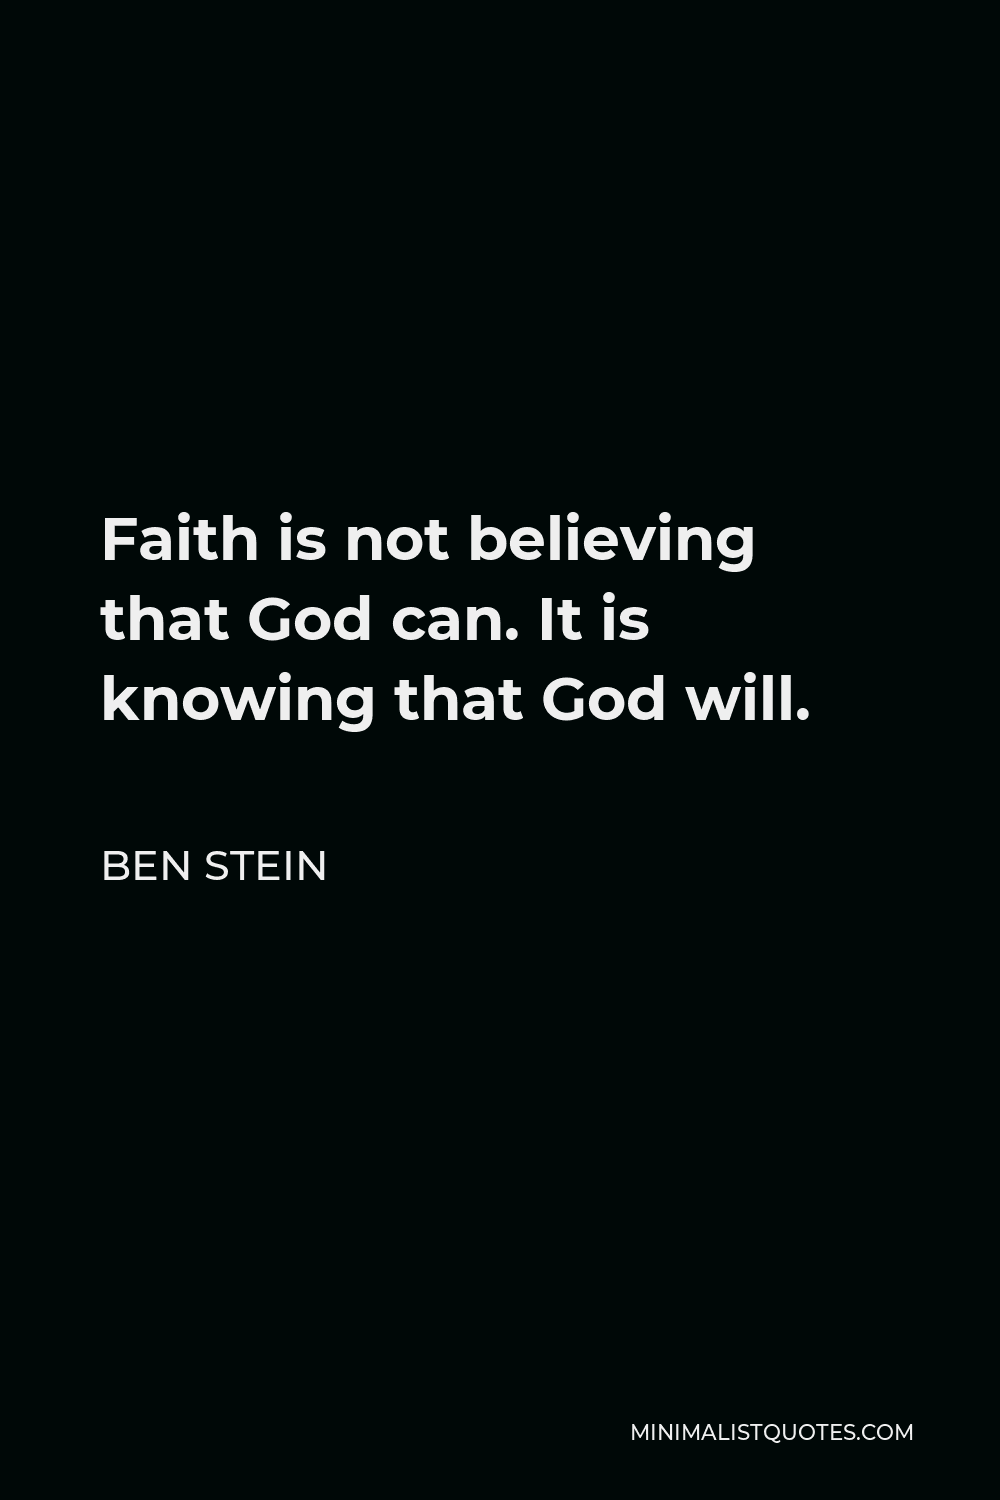 Ben Stein Quote - Faith is not believing that God can. It is knowing that God will.